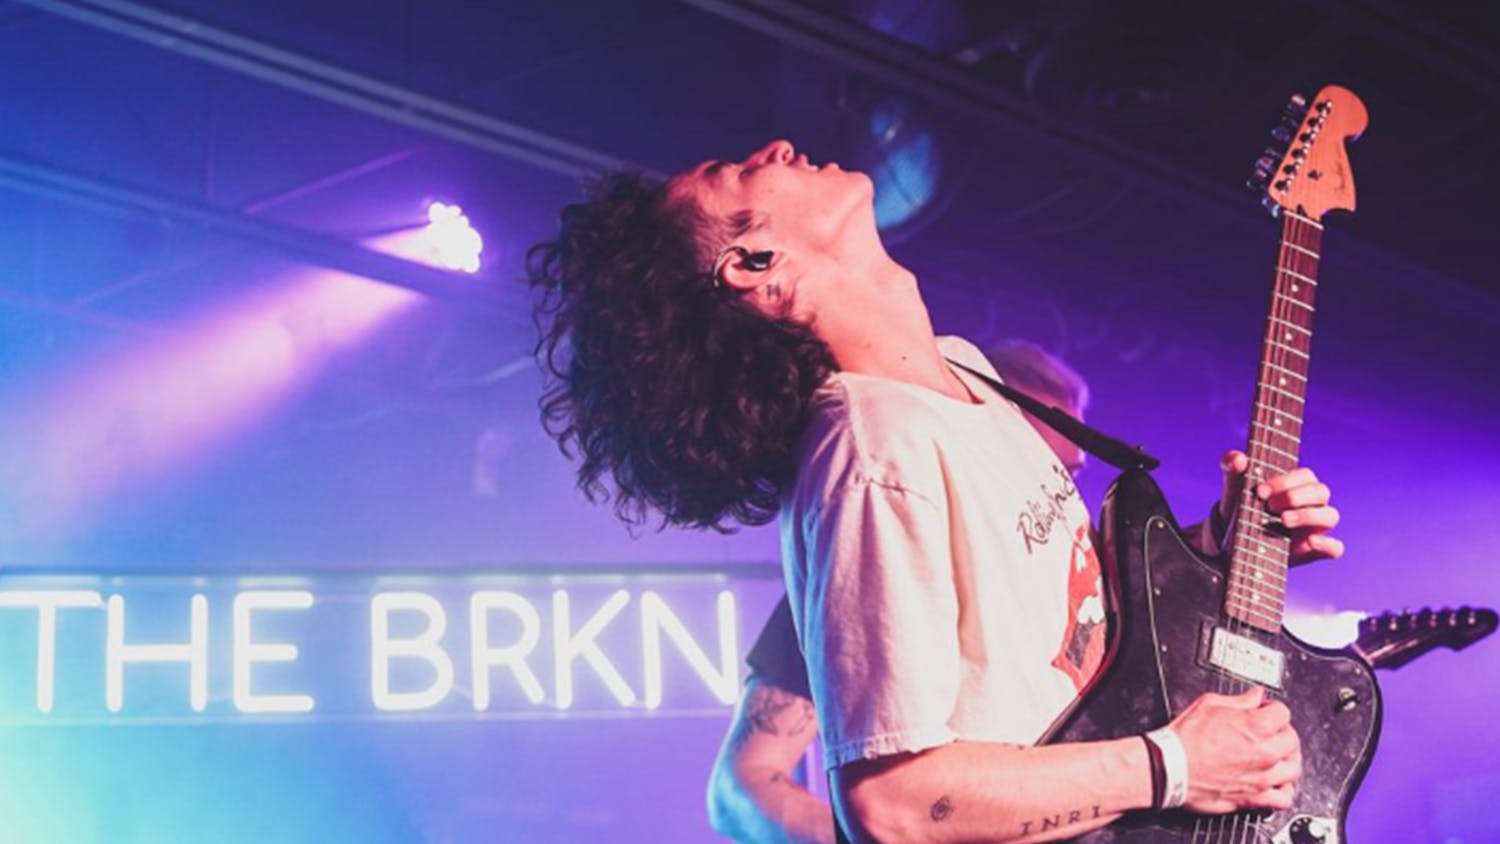 Singer and guitarist Jacob Cade plays at one of The BRKN's concerts. Cade plans to bring that energy when The BRKN play at New Brookland Tavern in Columbia on March 24, 2022.